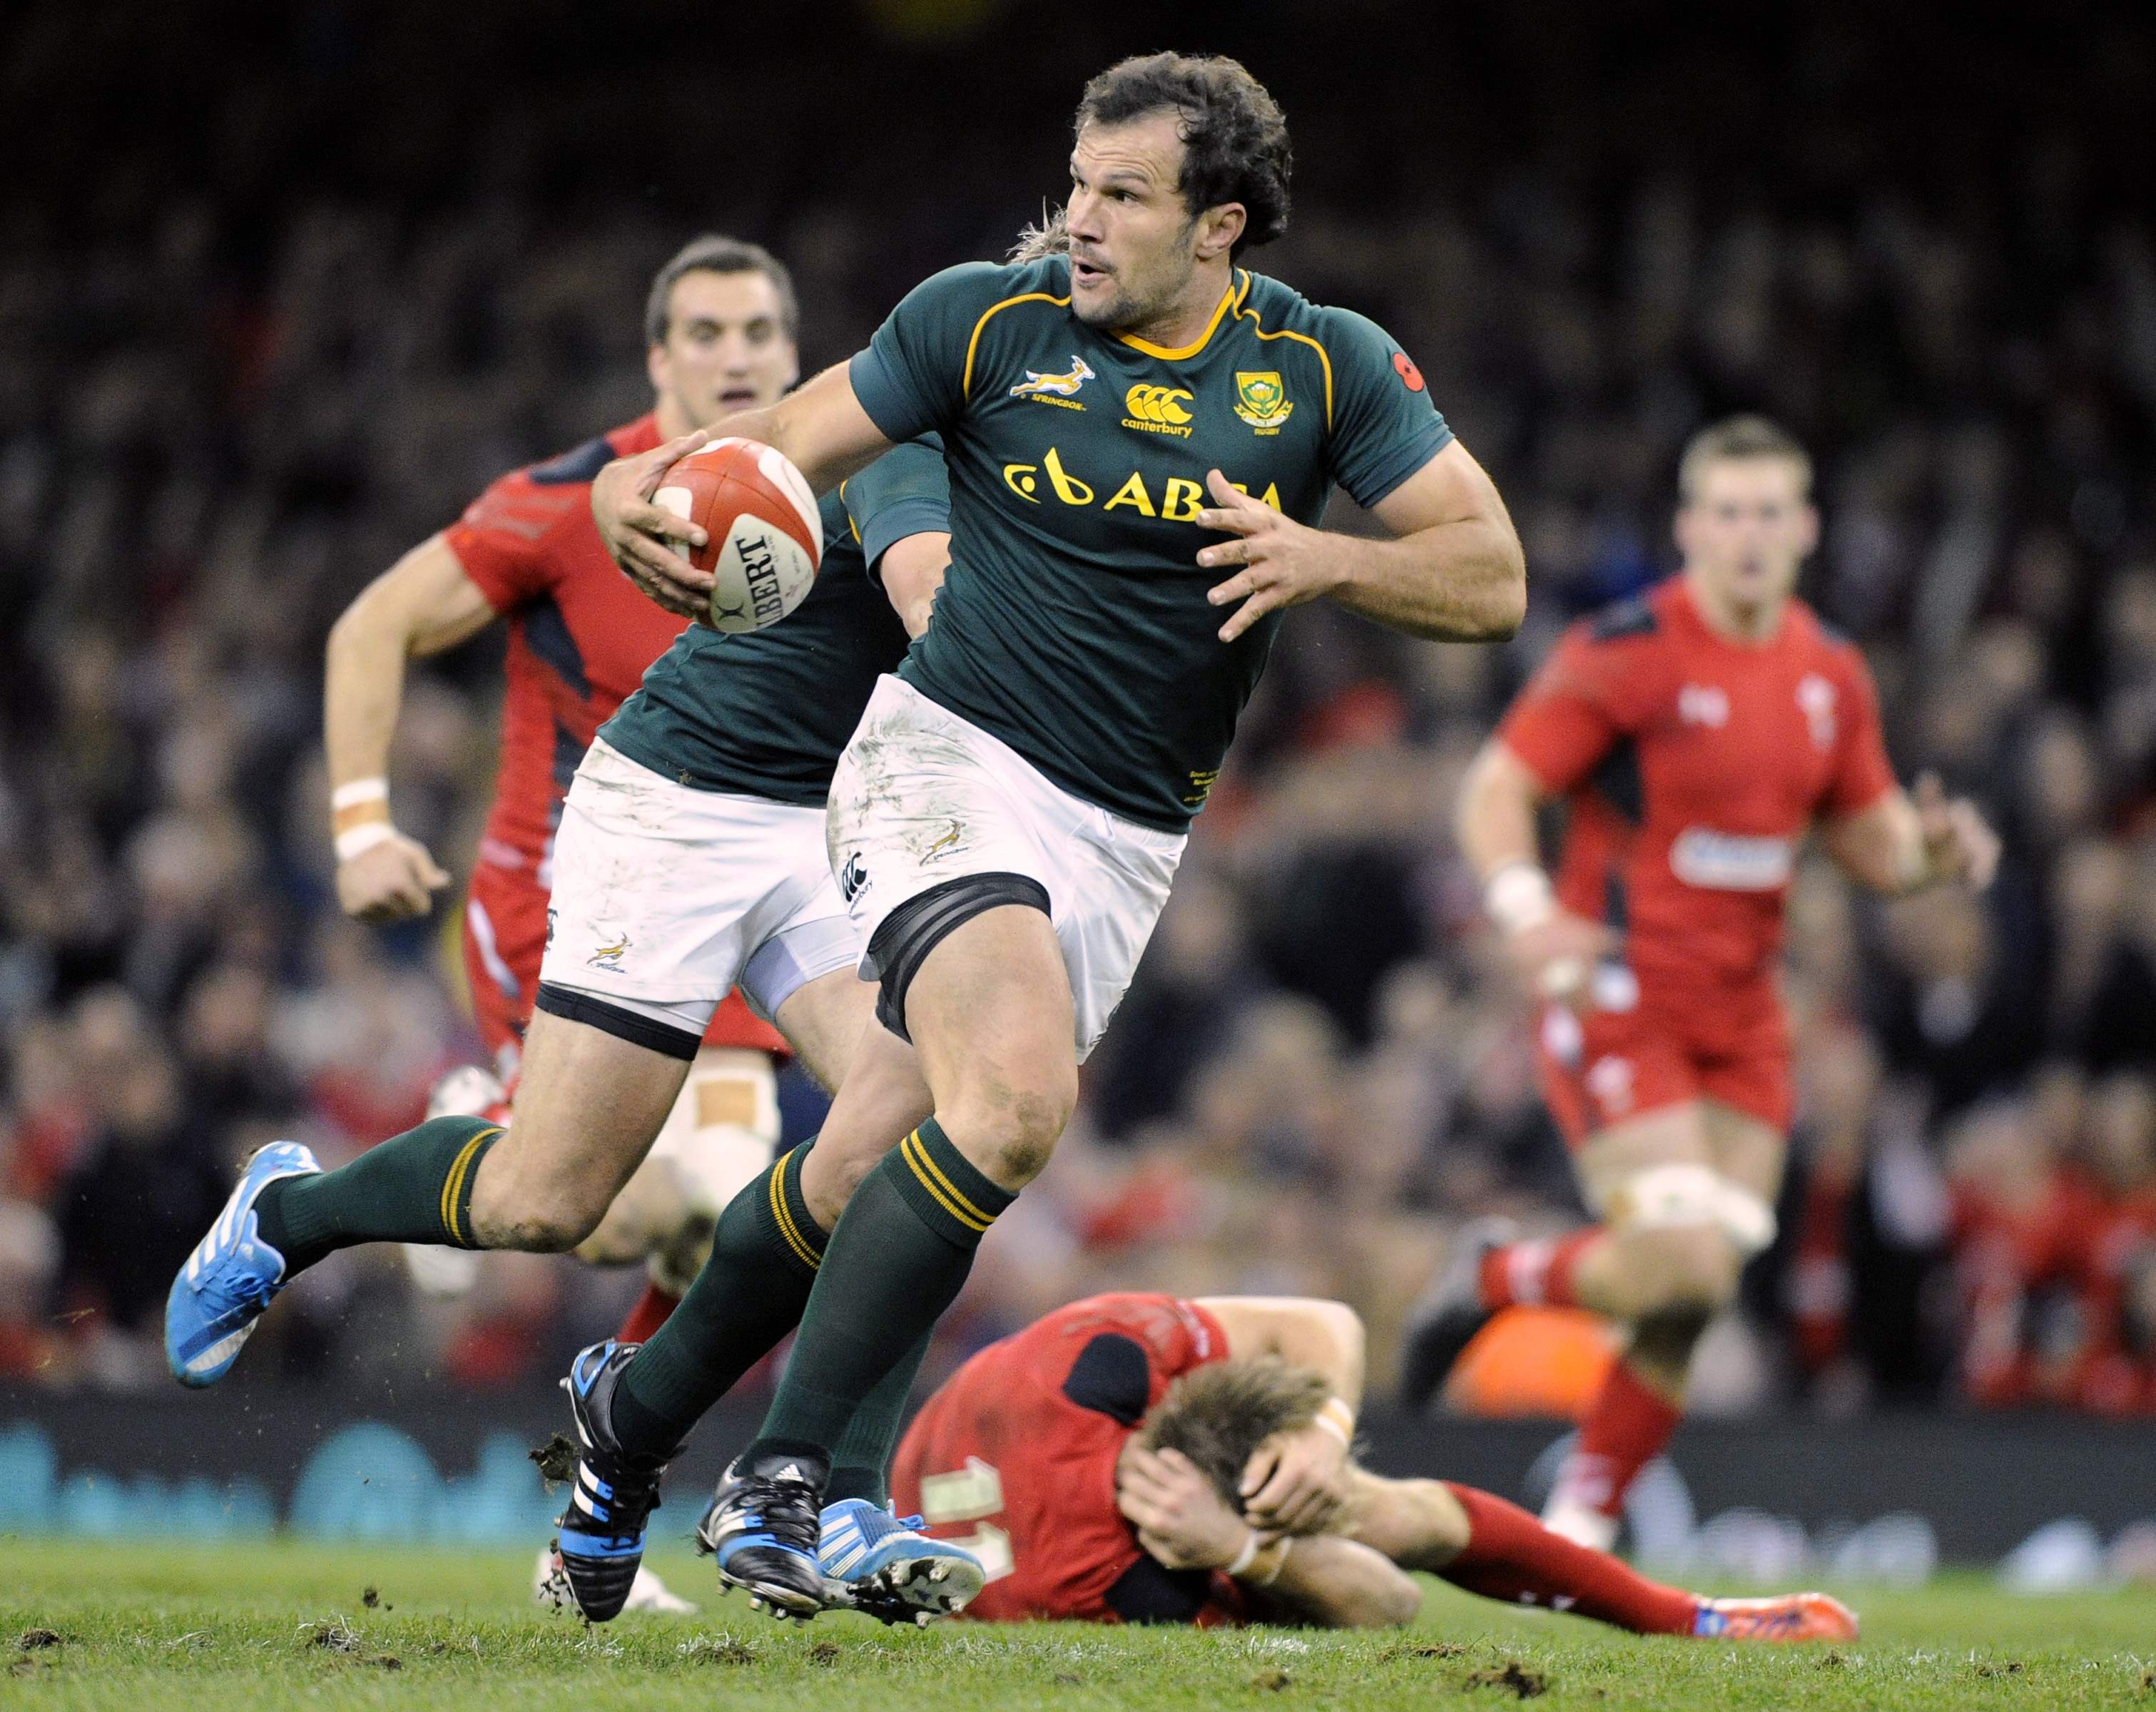 Bismarck Du Plessis has been a rock for the Springboks and the Sharks. The Sharks pack, led by Du Plessis, will present a strong challenge to the Crusaders in Saturday's Super 15 semi-final. Photo: Reuters